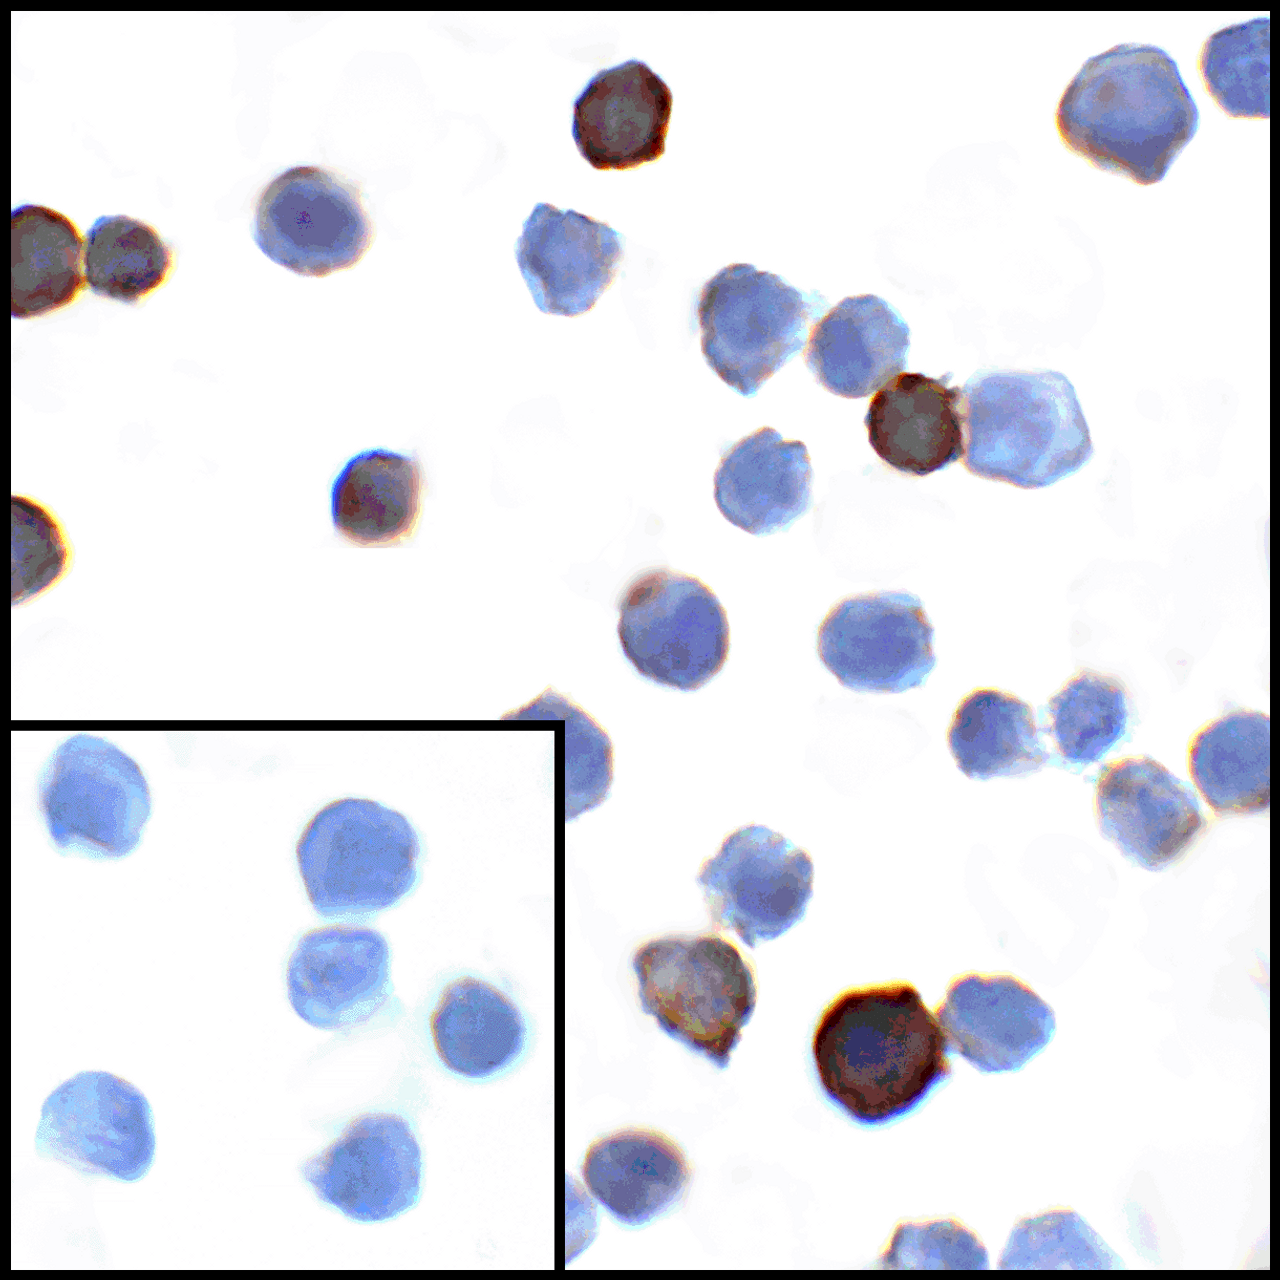 Immunocytochemistry of PD-L1 in transfected HEK293 cells with PD-L1 antibody at 1 ug/mL. Lower left: Immunocytochemistry in transfected HEK293 cells with control mouse IgG antibody at 1 ug/mL.